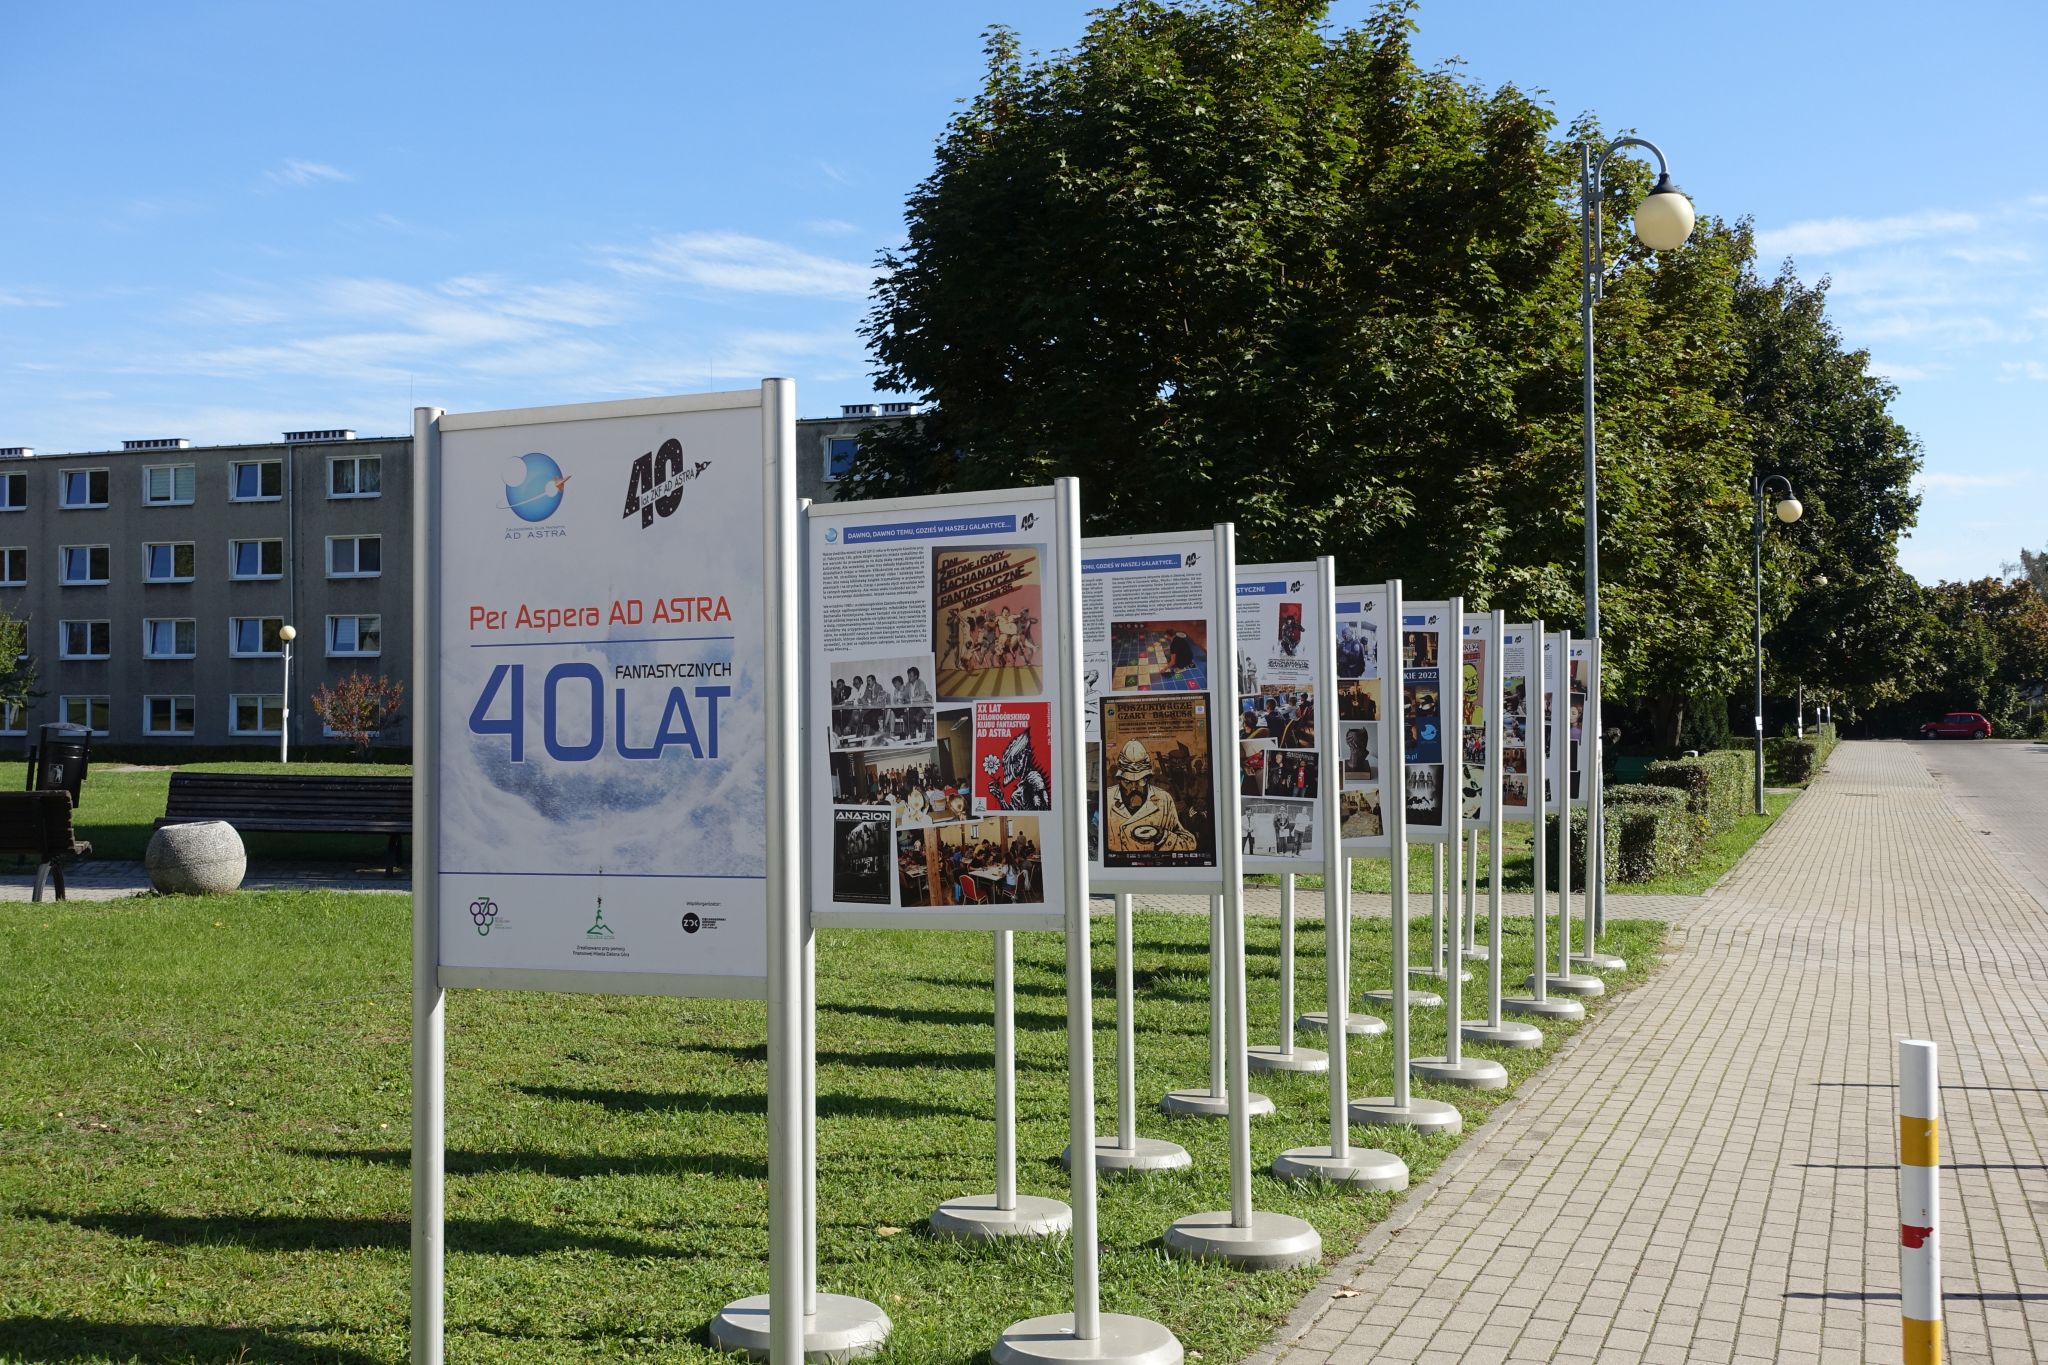 Outdoor exhibition featuring multiple stands.